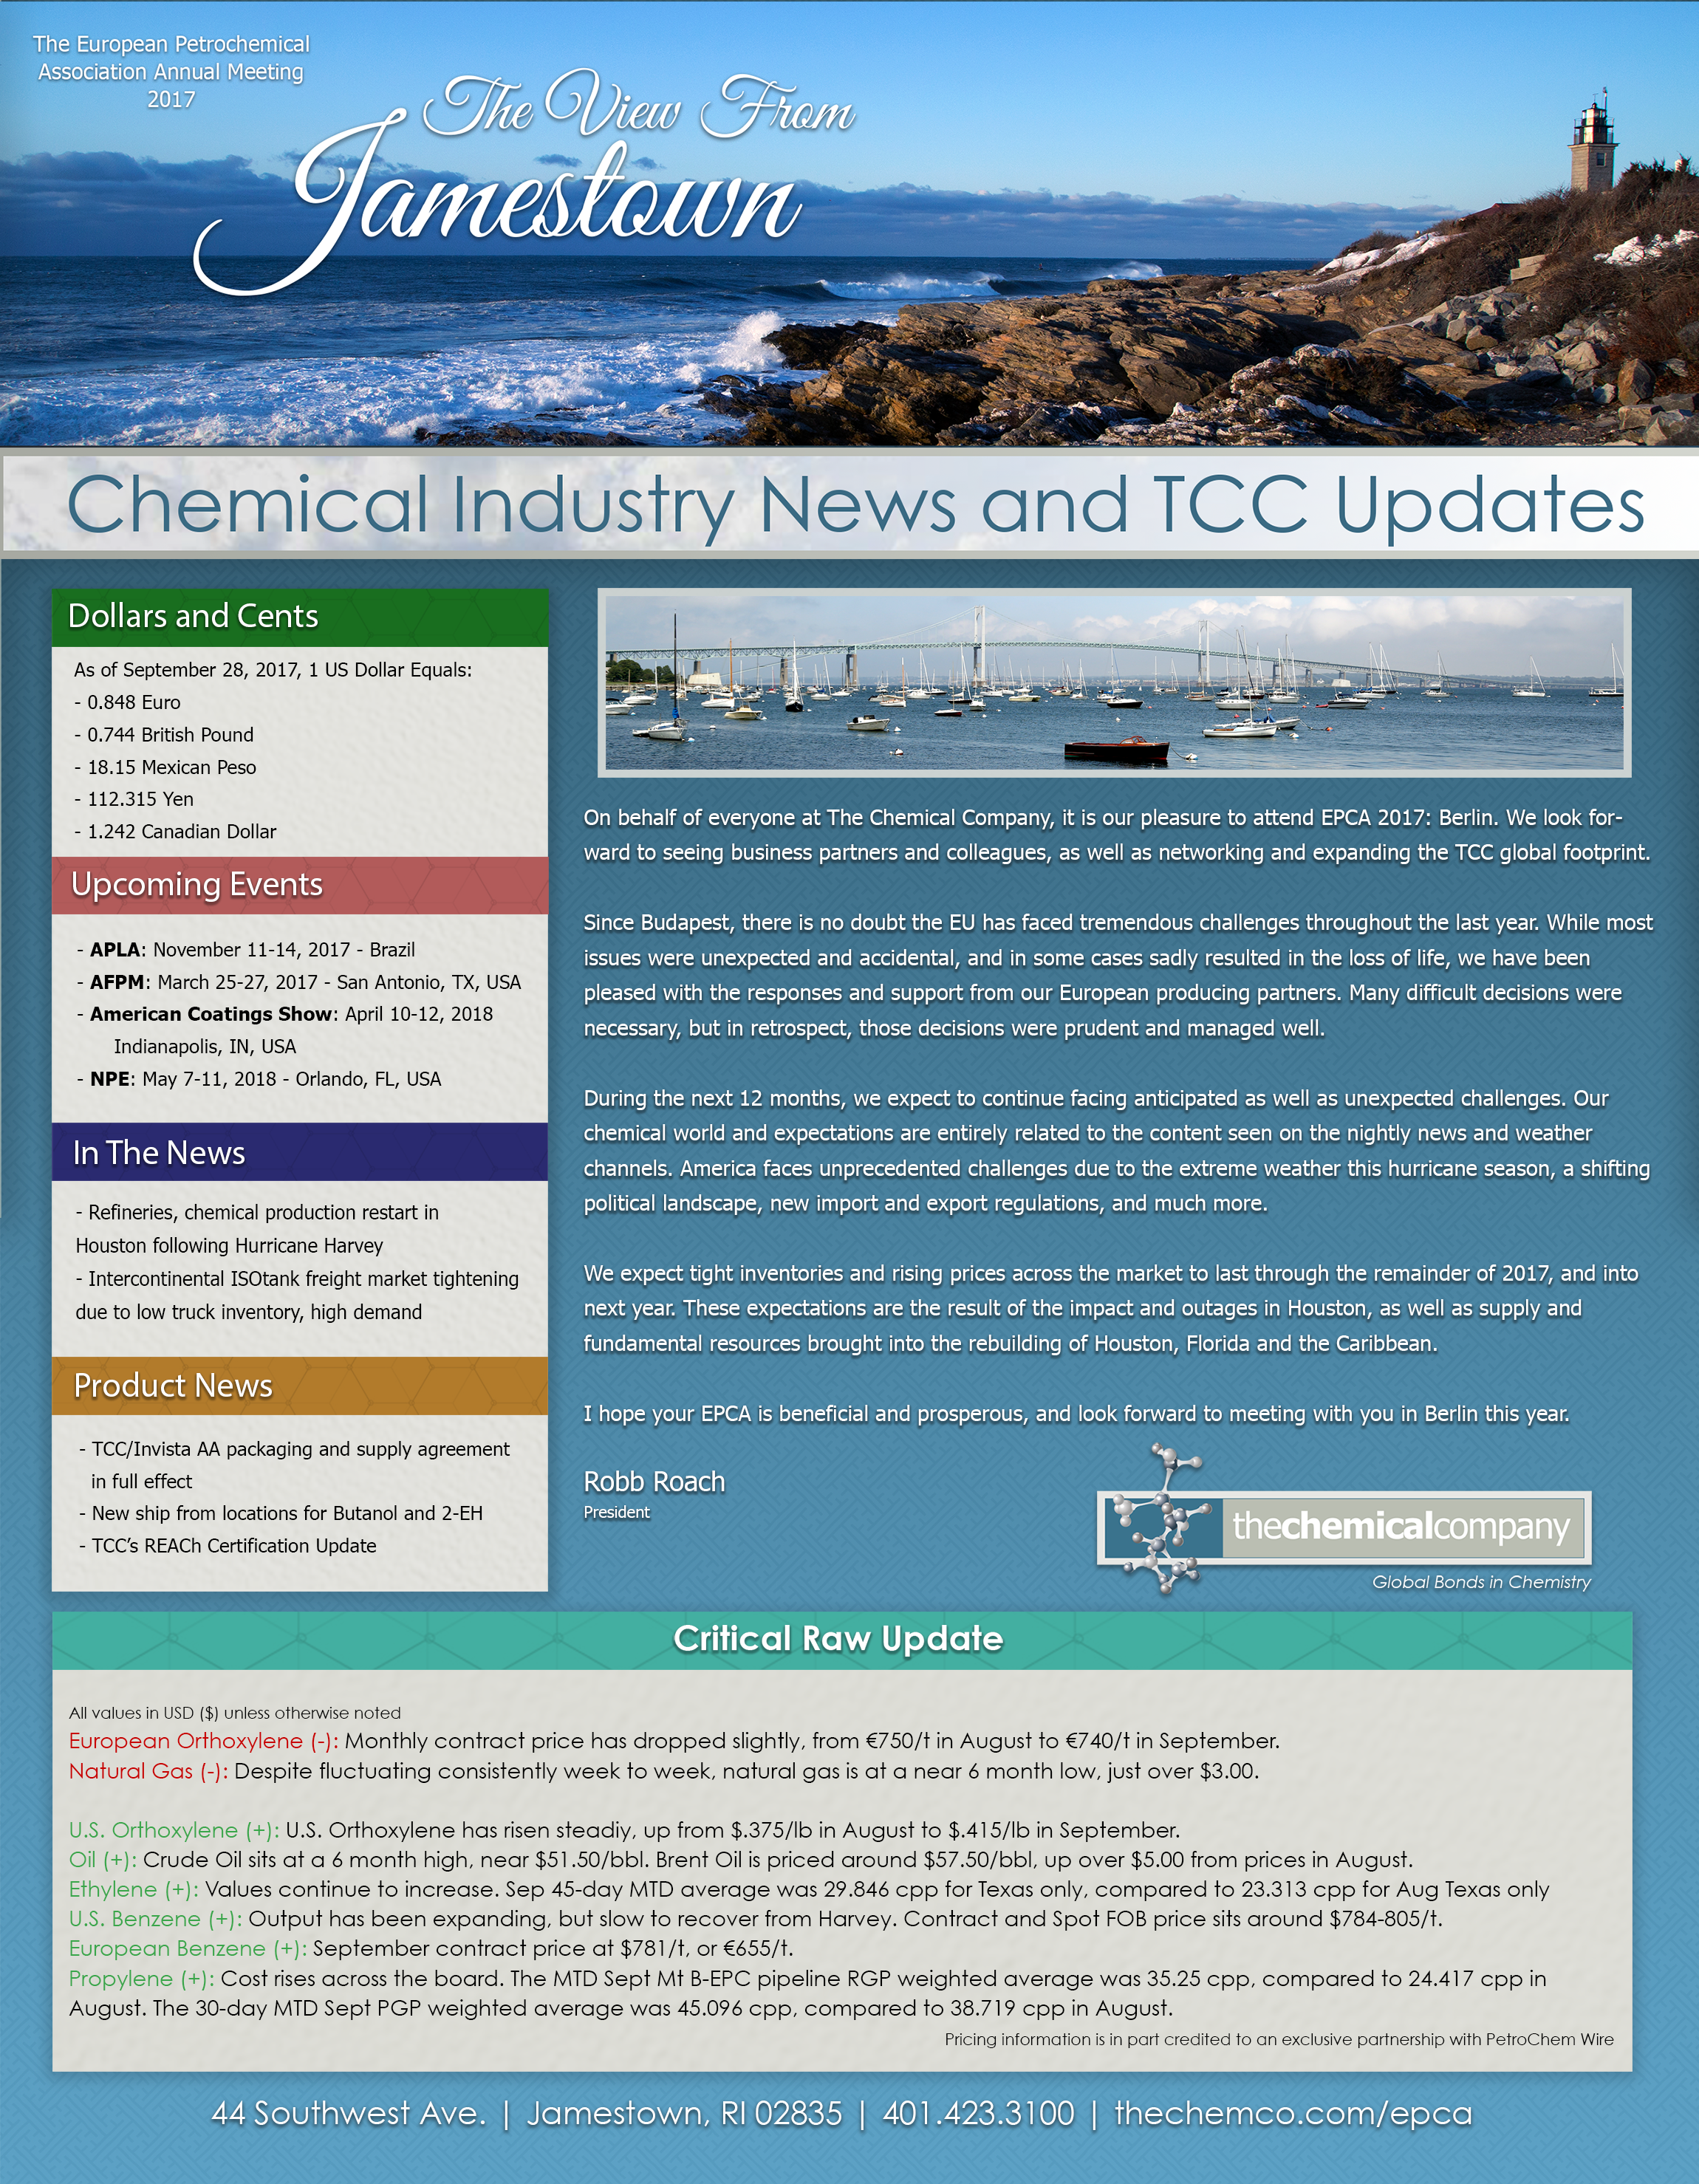 Chemical News and Updates - The Chemical Company | Chemical Distributor